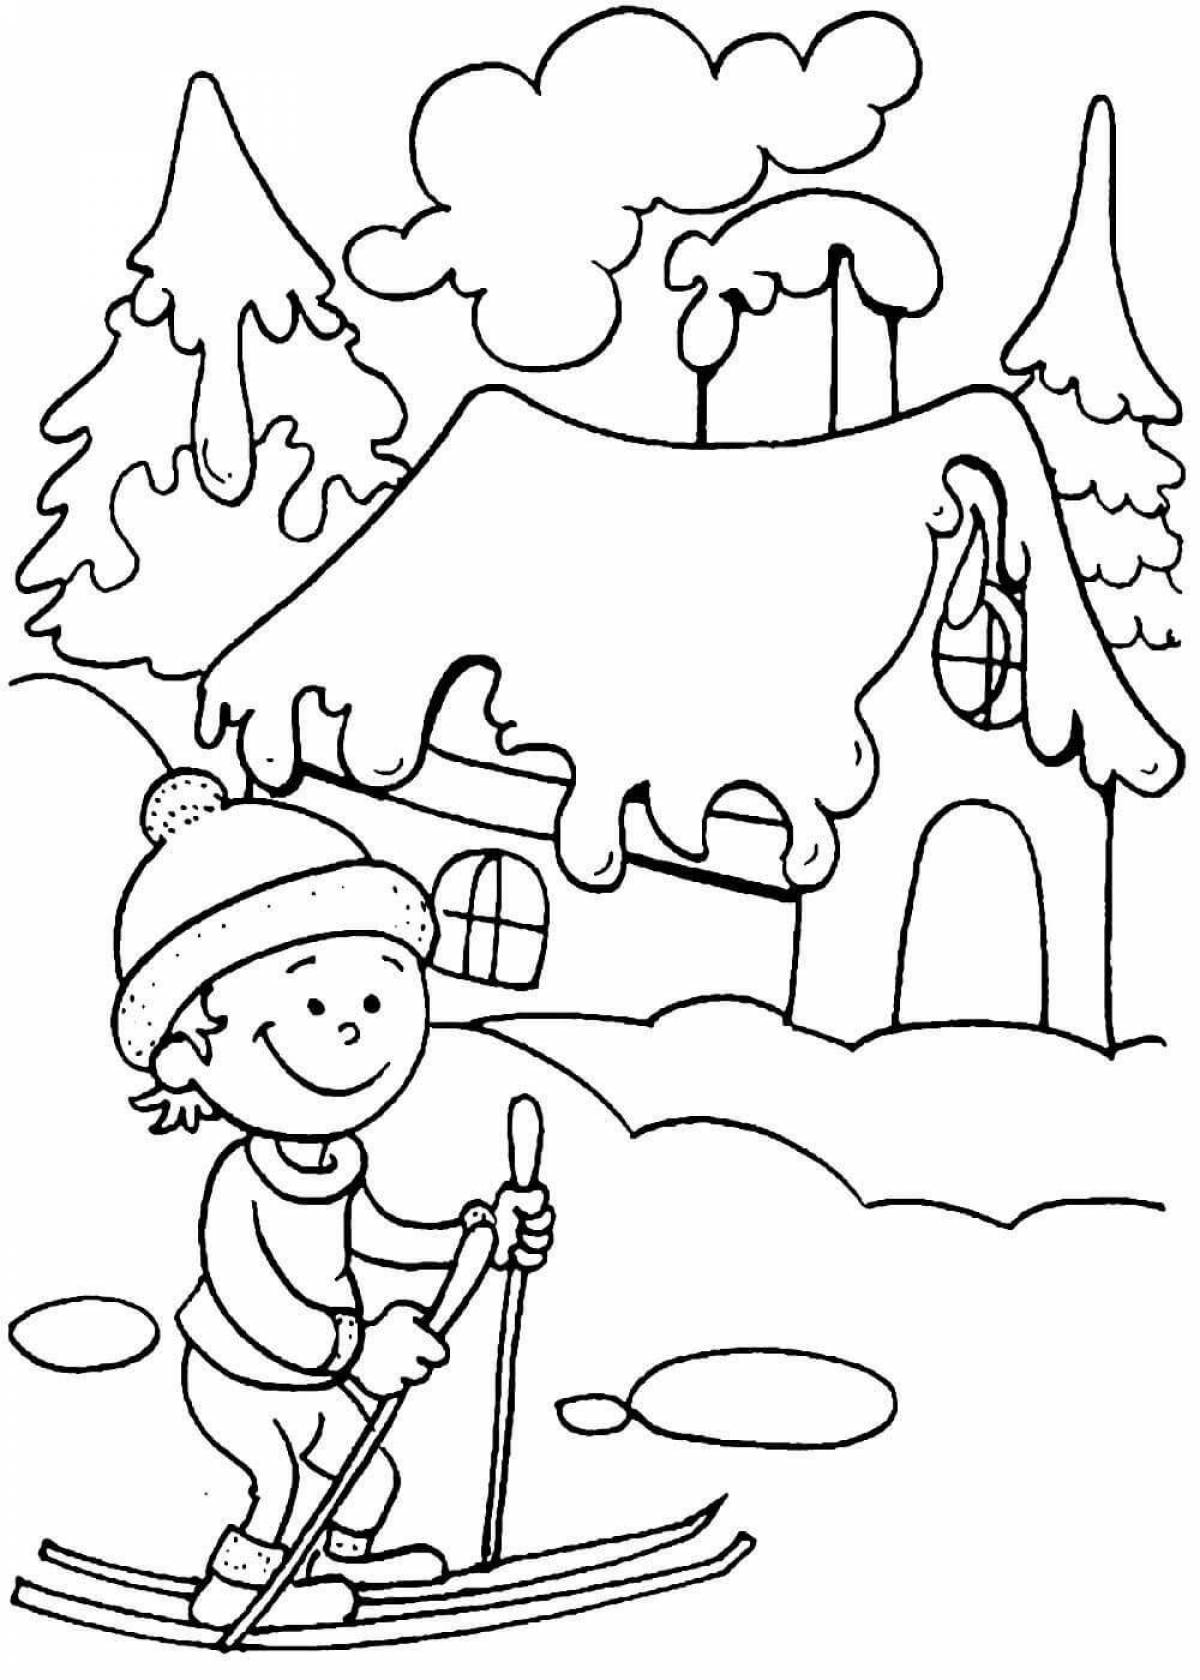 Glorious winter day coloring pages for kids